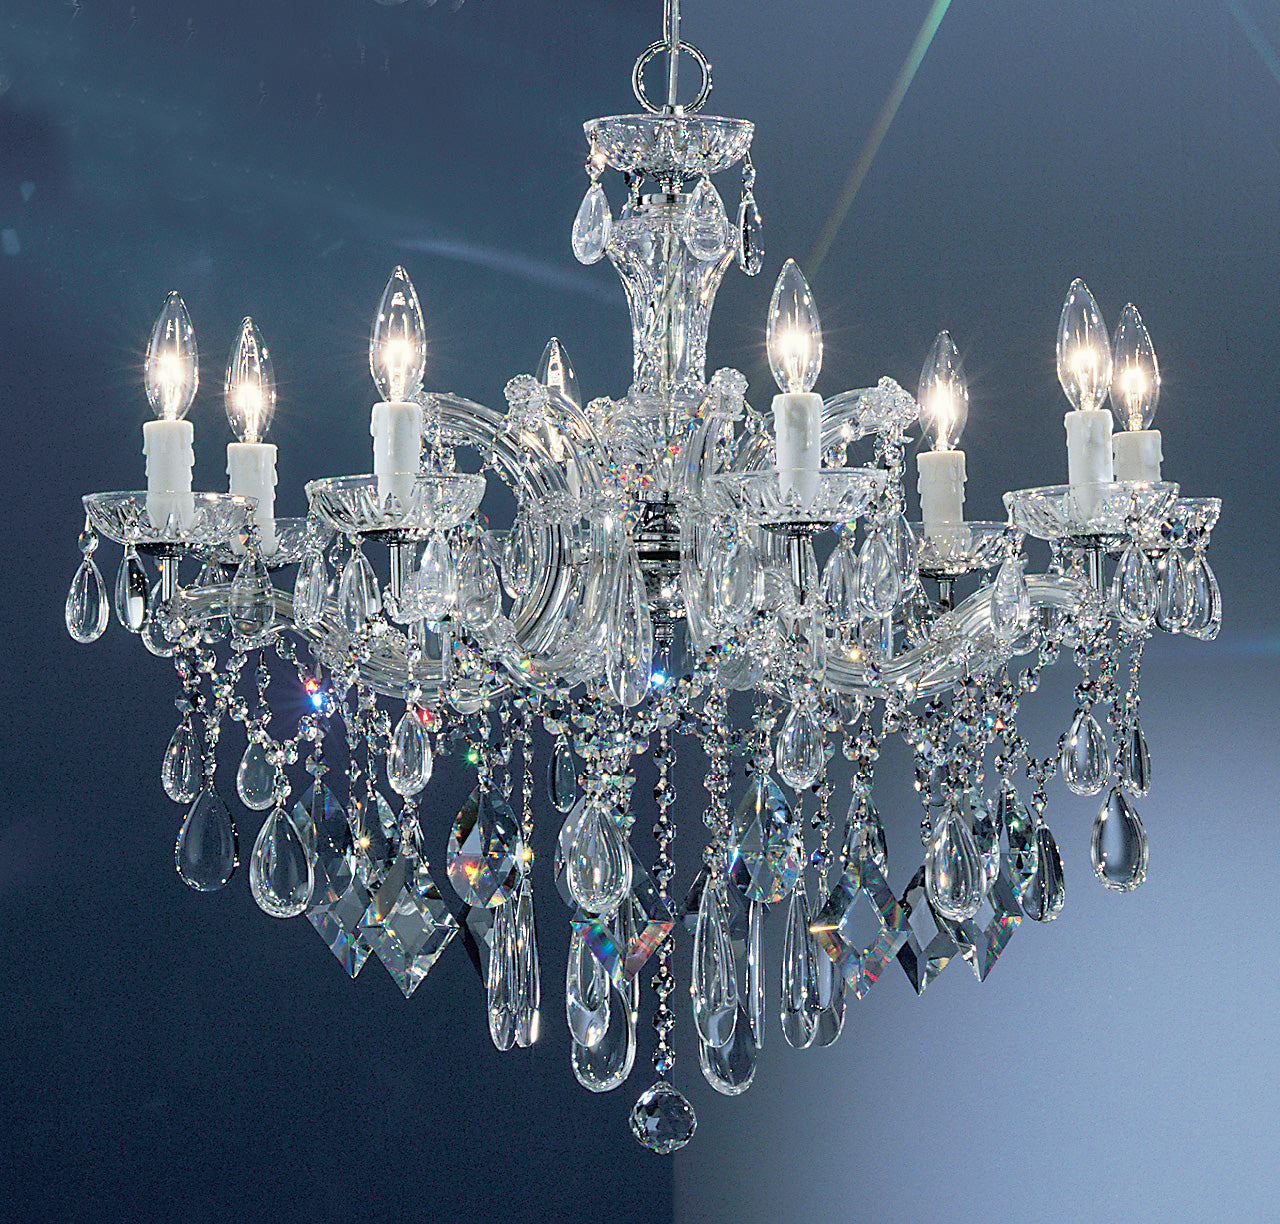 Classic Lighting 8358 CH C Rialto Contemporary Crystal Chandelier in Chrome